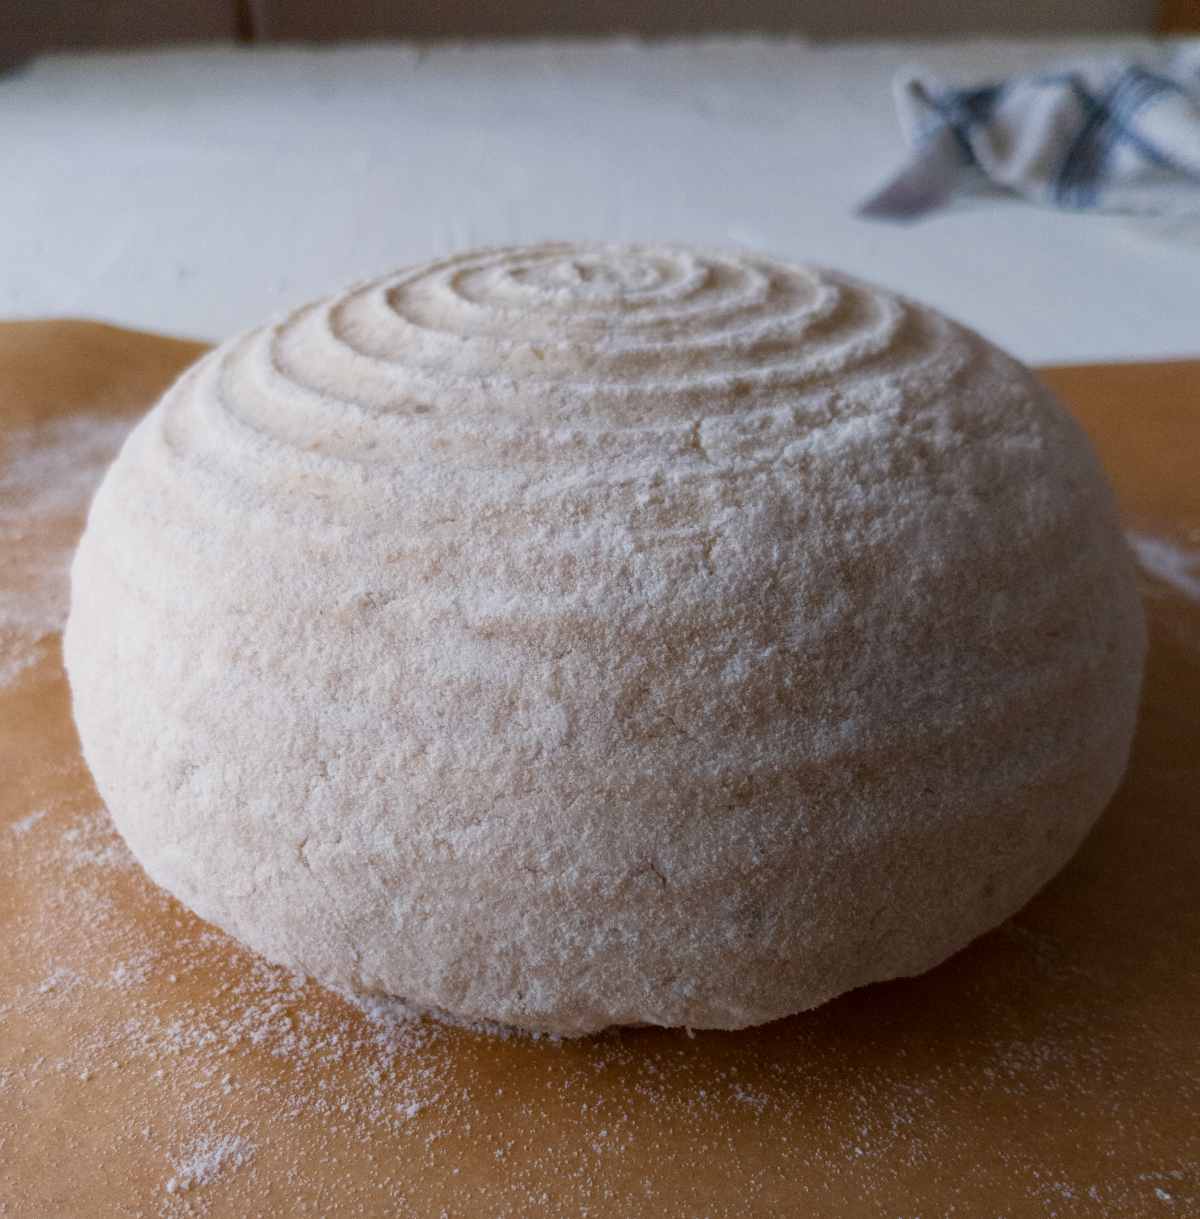 The dough after the final shaping.